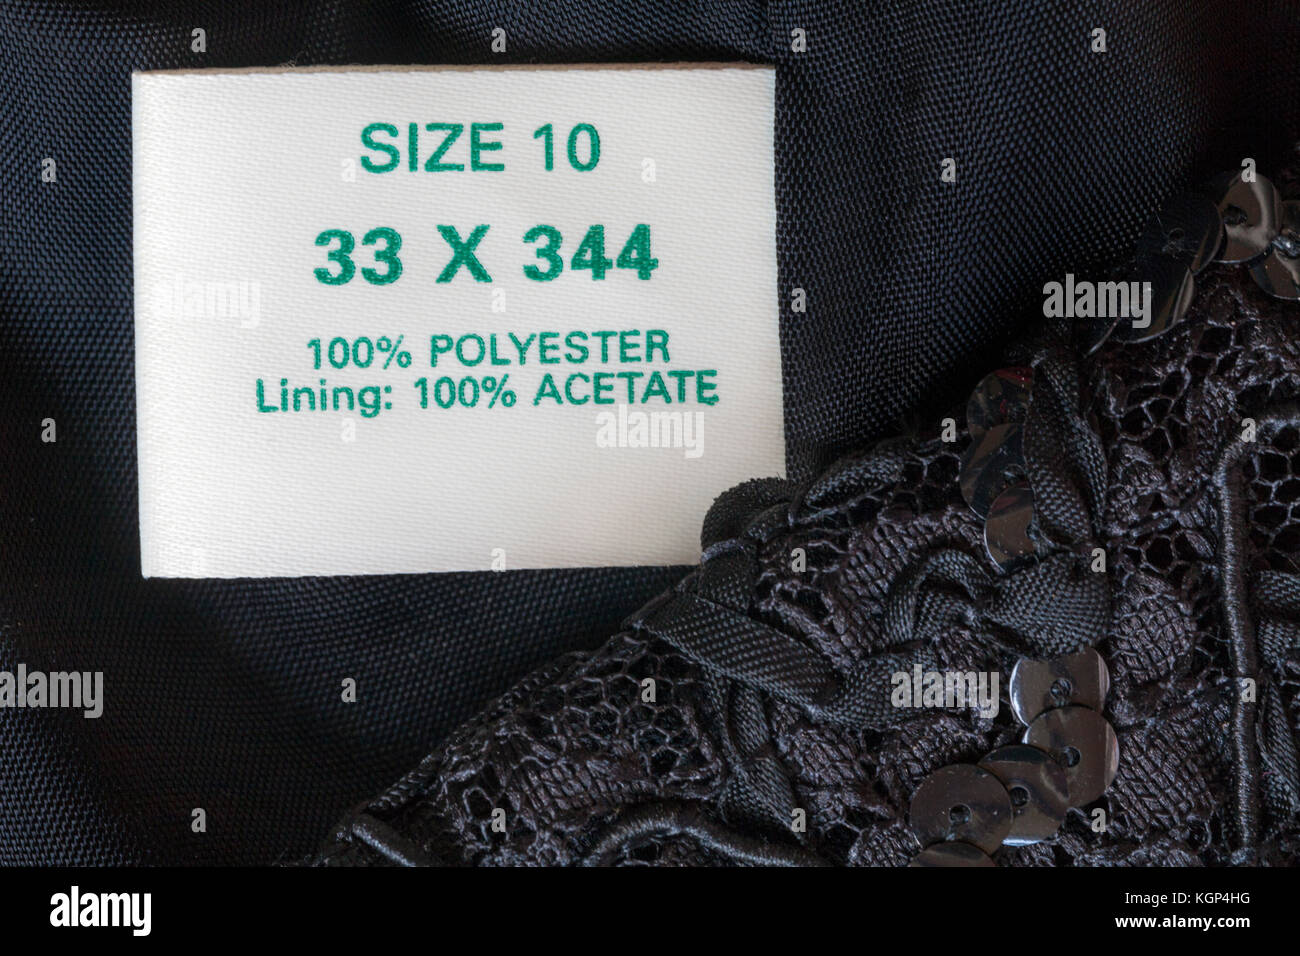 100% polyester lining 100% acetate label in woman's sequinned little black dress size 10 Stock Photo